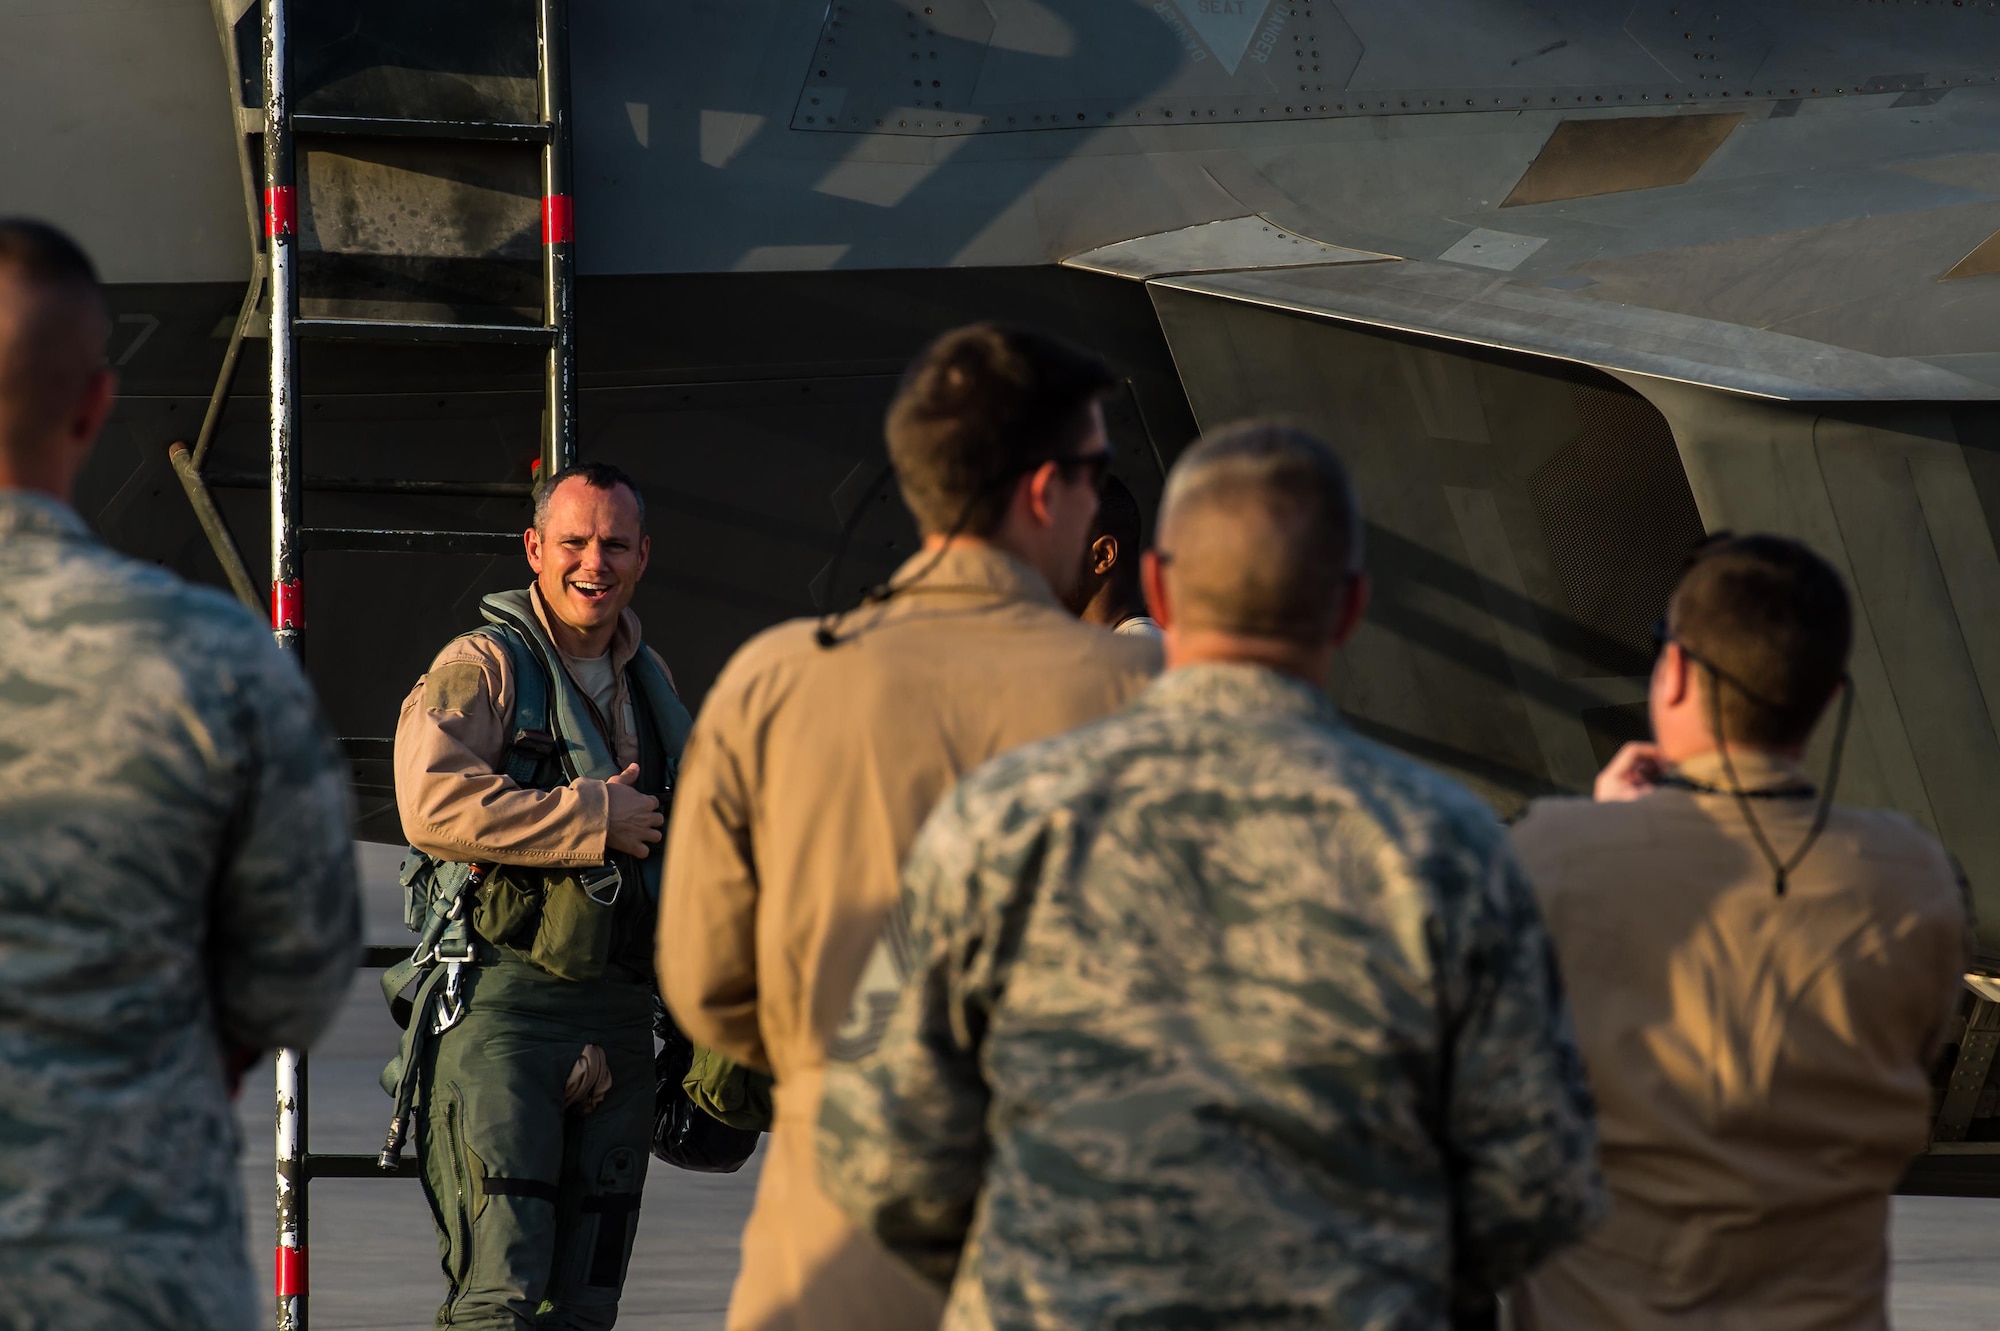 Brig. Gen. Charles Corcoran, 380th Air Expeditionary Wing Commander and F-22 Raptor pilot, laughs as he is congratulated for successfully completing 1000 flight hours in the F-22 at an undisclosed location in Southwest Asia, Nov. 11, 2016. Corcoran is one of 15 F-22 pilots to reach the 1000-flying-hour milestone. (U.S. Air Force photo by Senior Airman Tyler Woodward)